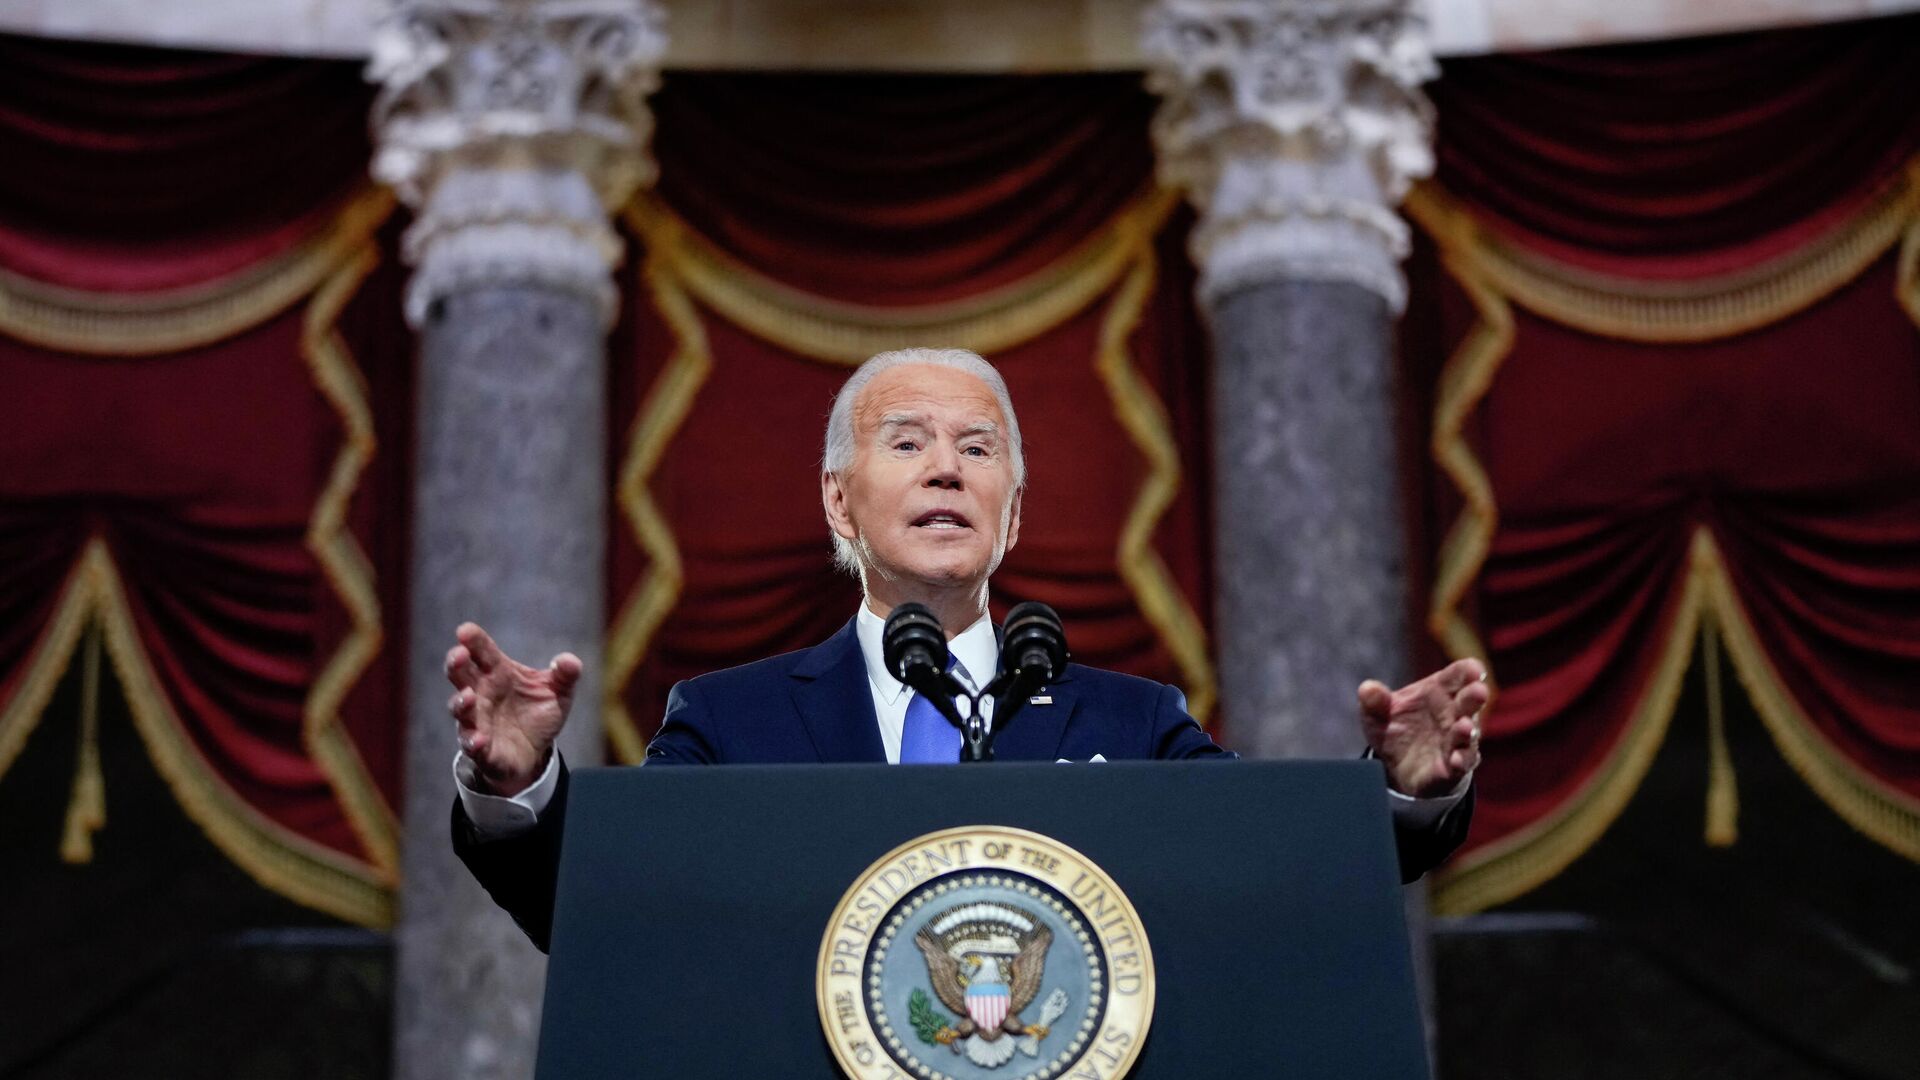 US President Joe Biden speaks at the US Capitol on January 6, 2022, to mark the anniversary of the attack on the Capitol in Washington, DC. - Biden accused his predecessor Donald Trump of attempting to block the democratic transfer of power on January 6, 2021. For the first time in our history, a president not just lost an election; he tried to prevent the peaceful transfer of power as a violent mob breached the Capitol, Biden said. - Sputnik International, 1920, 06.01.2022